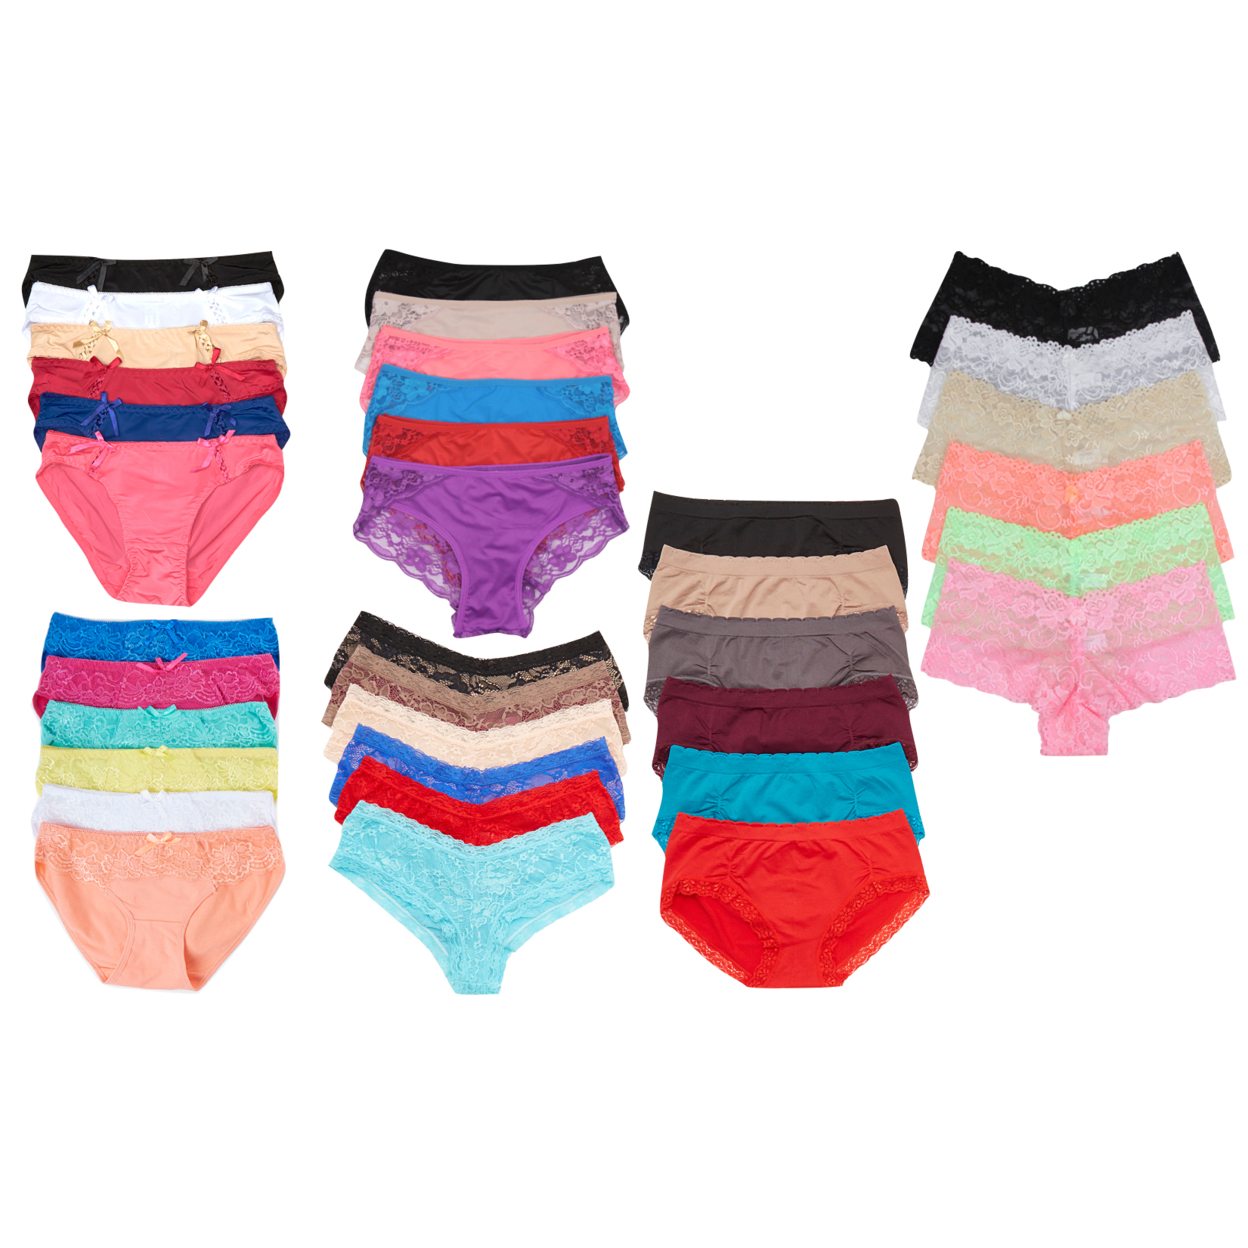 6 Pack Of Bikini Brief Panty Mystery Deal - XL